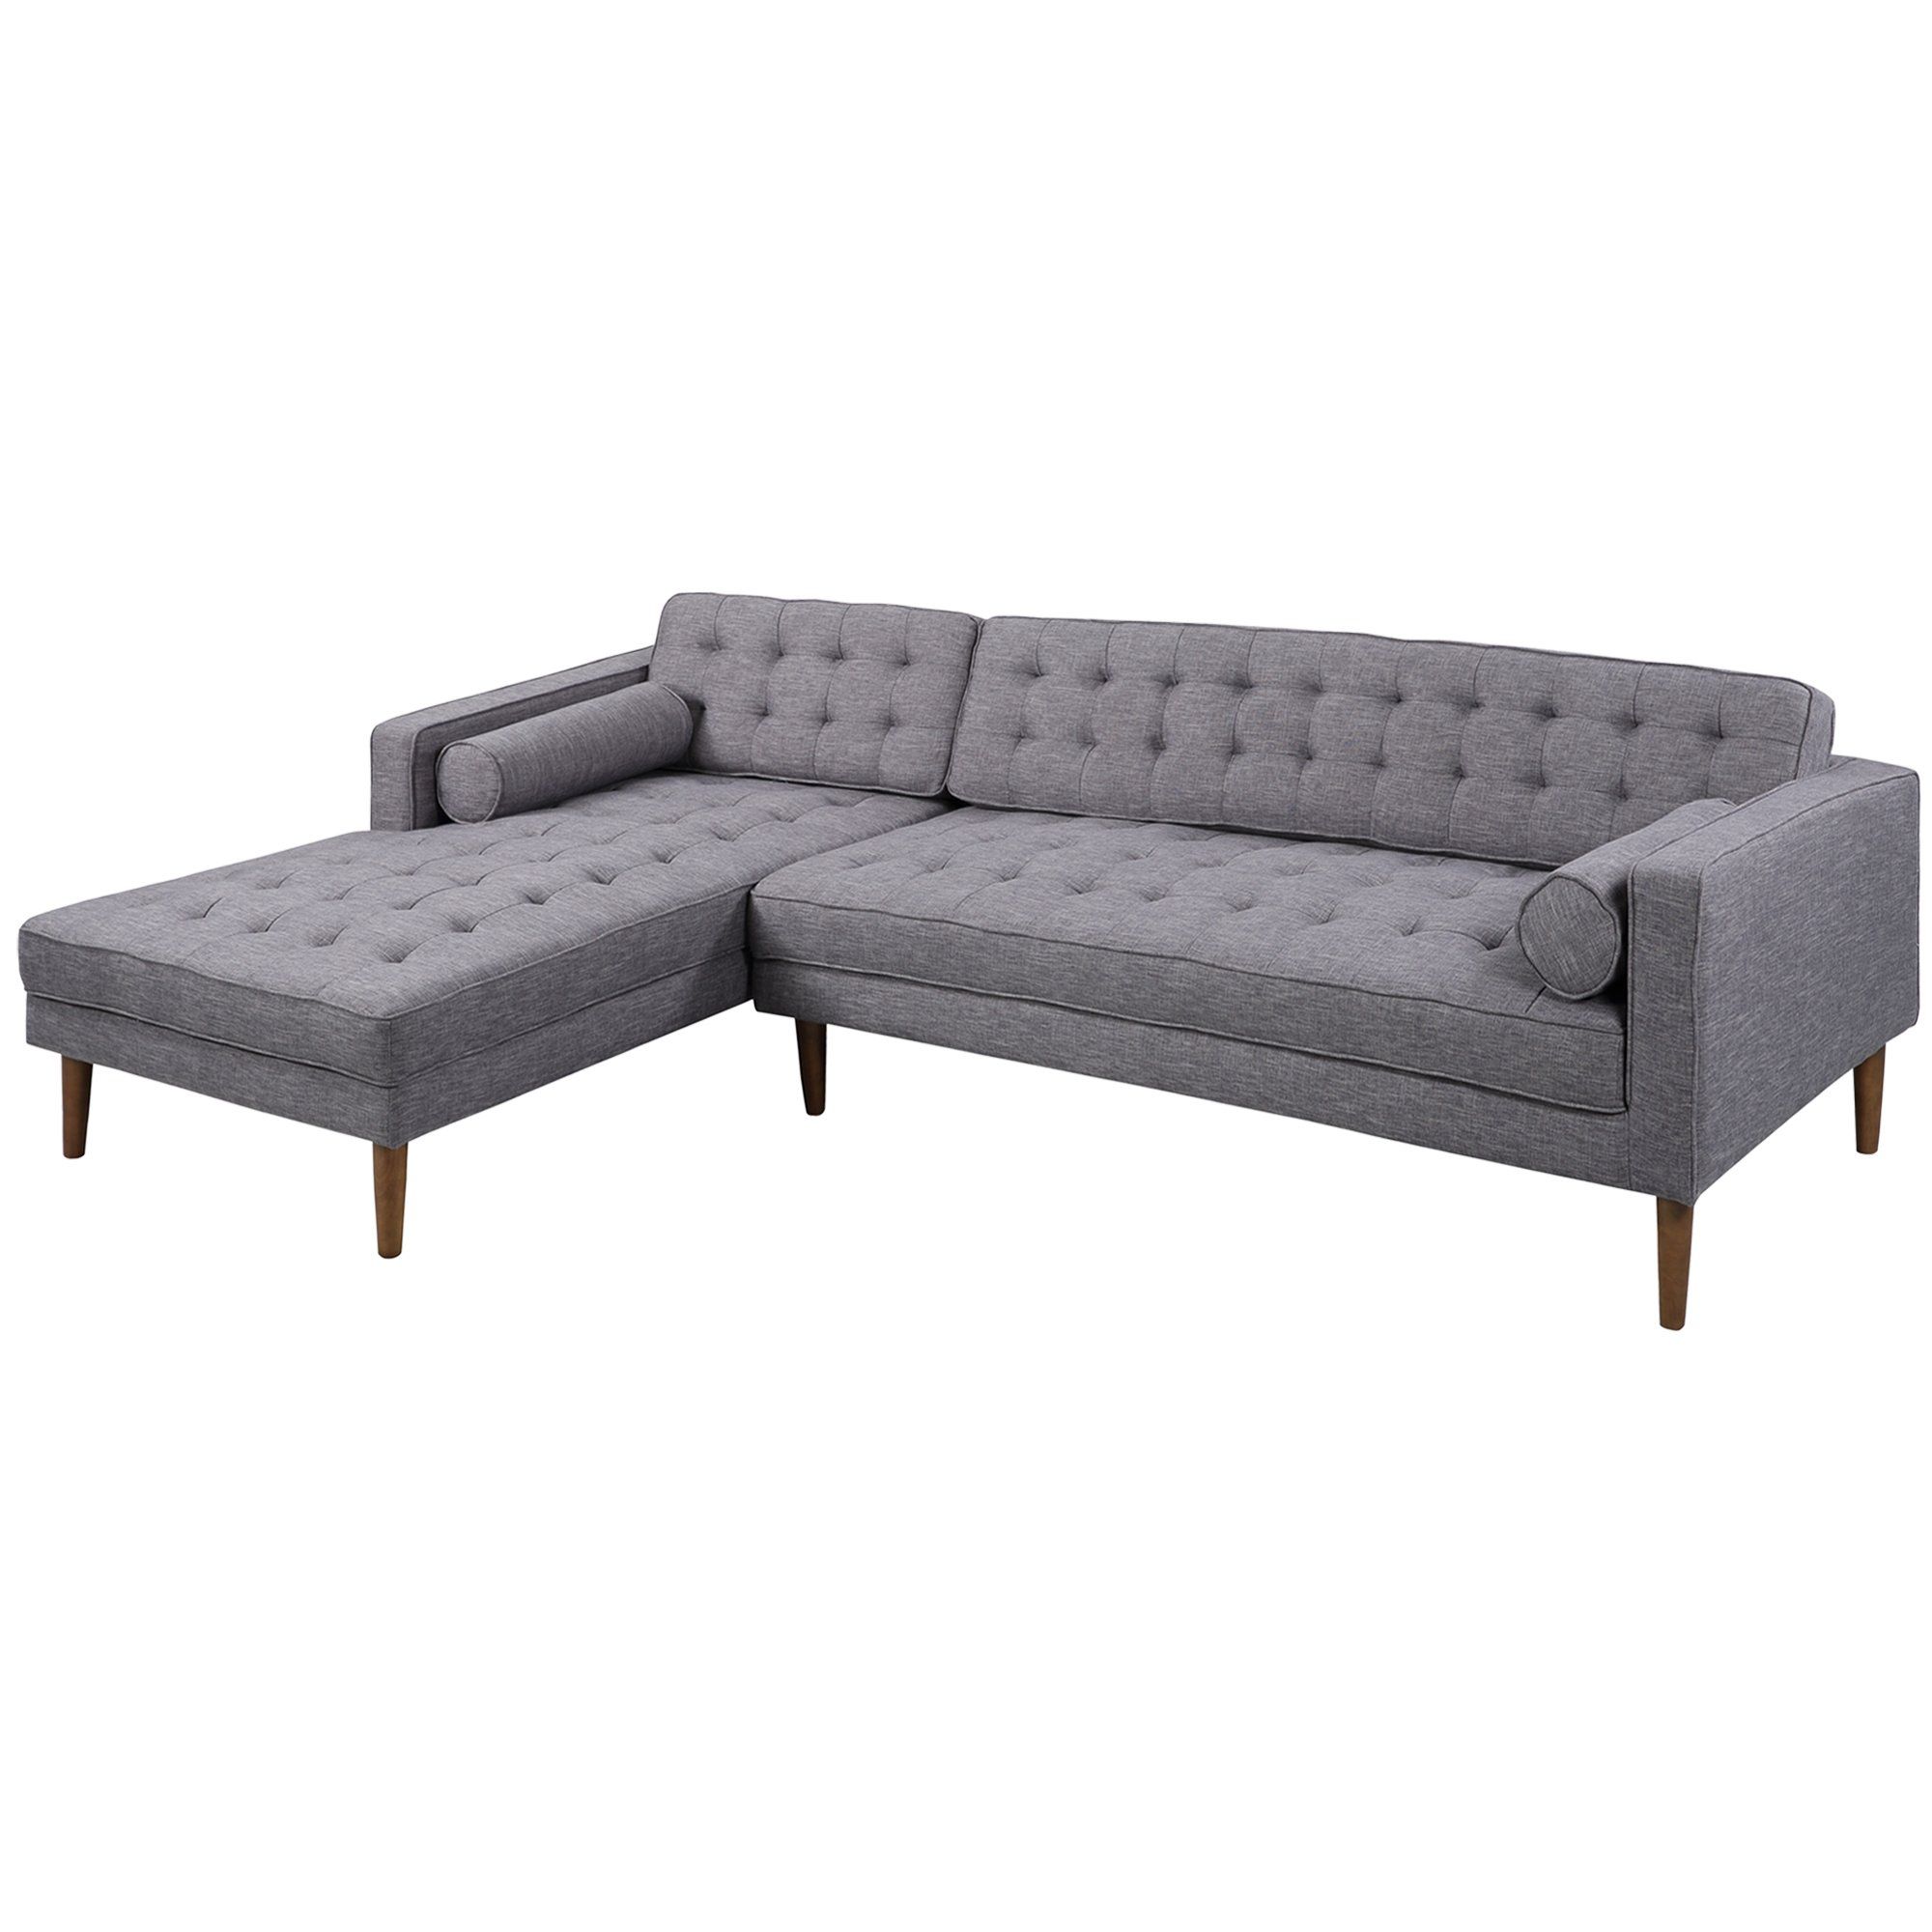 Featured Photo of 15 Best Ideas Element Left-side Chaise Sectional Sofas in Dark Gray Linen and Walnut Legs